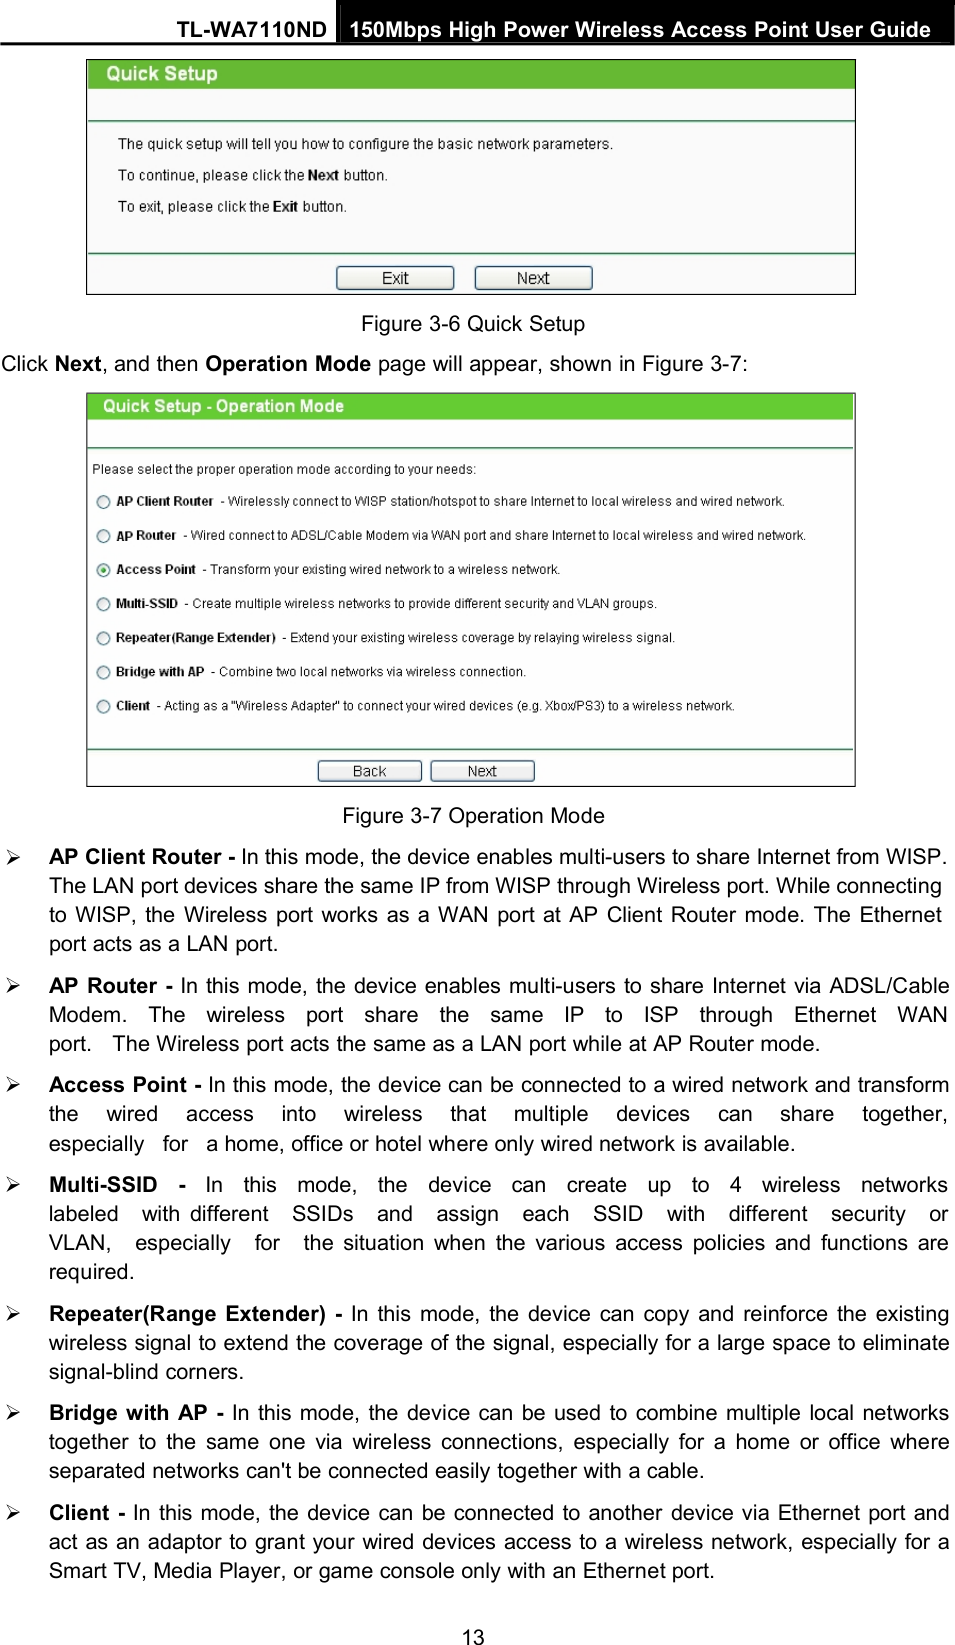 TL-WA7110ND 150Mbps High Power Wireless Access Point User GuideFigure 3-6 Quick SetupClick Next, and then Operation Mode page will appear, shown in Figure 3-7:Figure 3-7 Operation ModeAP Client Router - In this mode, the device enables multi-users to share Internet from WISP.The LAN port devices share the same IP from WISP through Wireless port. While connectingto WISP, the Wireless port works as a WAN port at AP Client Router mode. The Ethernetport acts as a LAN port.AP Router - In this mode, the device enables multi-users to share Internet via ADSL/CableModem. The wireless port share the same IP to ISP through Ethernet WANport. The Wireless port acts the same as a LAN port while at AP Router mode.Access Point - In this mode, the device can be connected to a wired network and transformthe wired access into wireless that multiple devices can share together,especially for a home, office or hotel where only wired network is available.Multi-SSID - In this mode, the device can create up to 4 wireless networkslabeled with different SSIDs and assign each SSID with different security orVLAN, especially for the situation when the various access policies and functions arerequired.Repeater(Range Extender) - In this mode, the device can copy and reinforce the existingwireless signal to extend the coverage of the signal, especially for a large space to eliminatesignal-blind corners.Bridge with AP - In this mode, the device can be used to combine multiple local networkstogether to the same one via wireless connections, especially for a home or office whereseparated networks can&apos;t be connected easily together with a cable.Client - In this mode, the device can be connected to another device via Ethernet port andact as an adaptor to grant your wired devices access to a wireless network, especially for aSmart TV, Media Player, or game console only with an Ethernet port.13